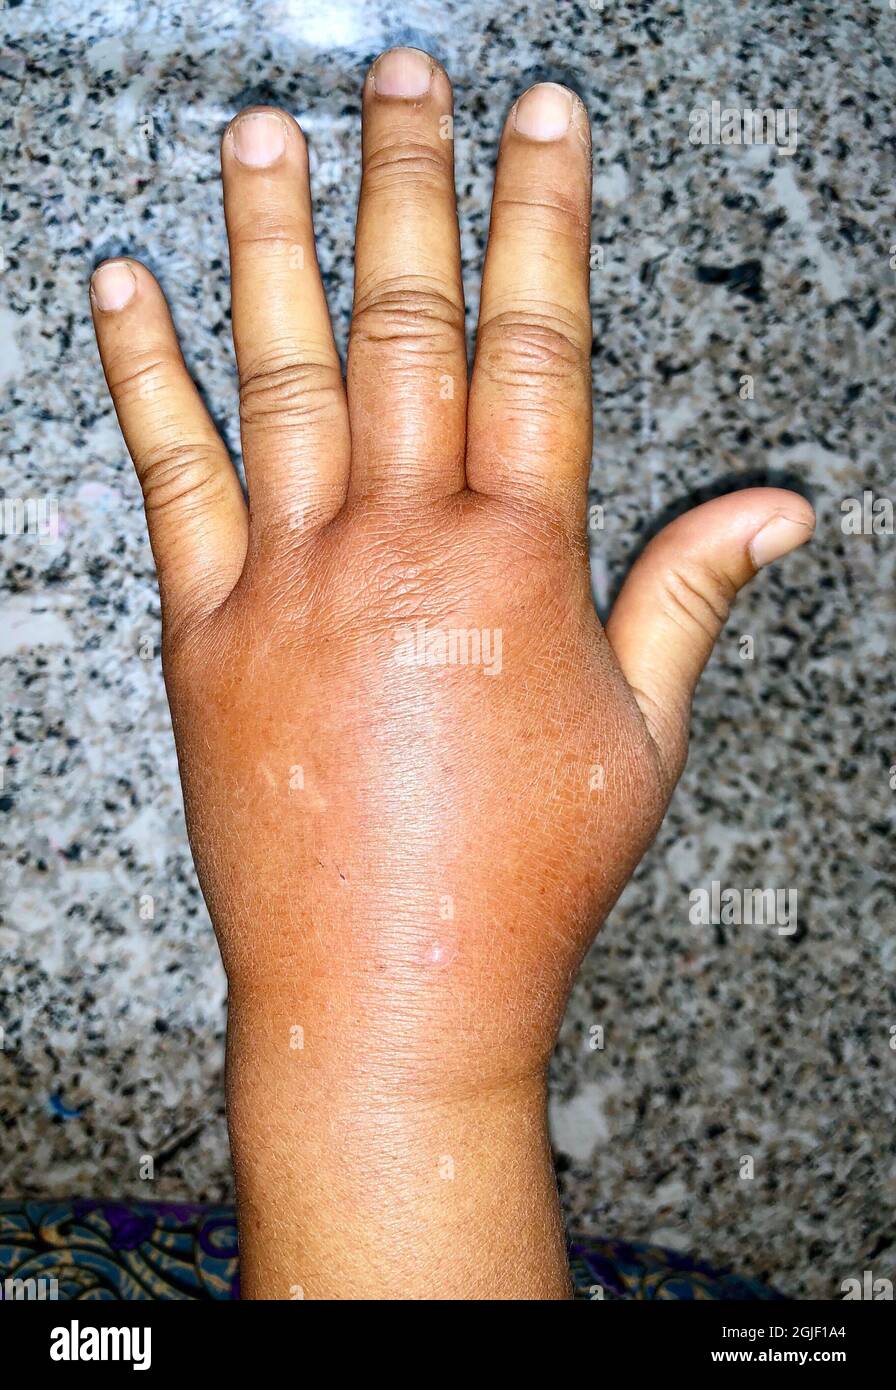 Unilateral edema of upper limb. Swollen hand and arm of Asian woman. Closeup view. Stock Photo